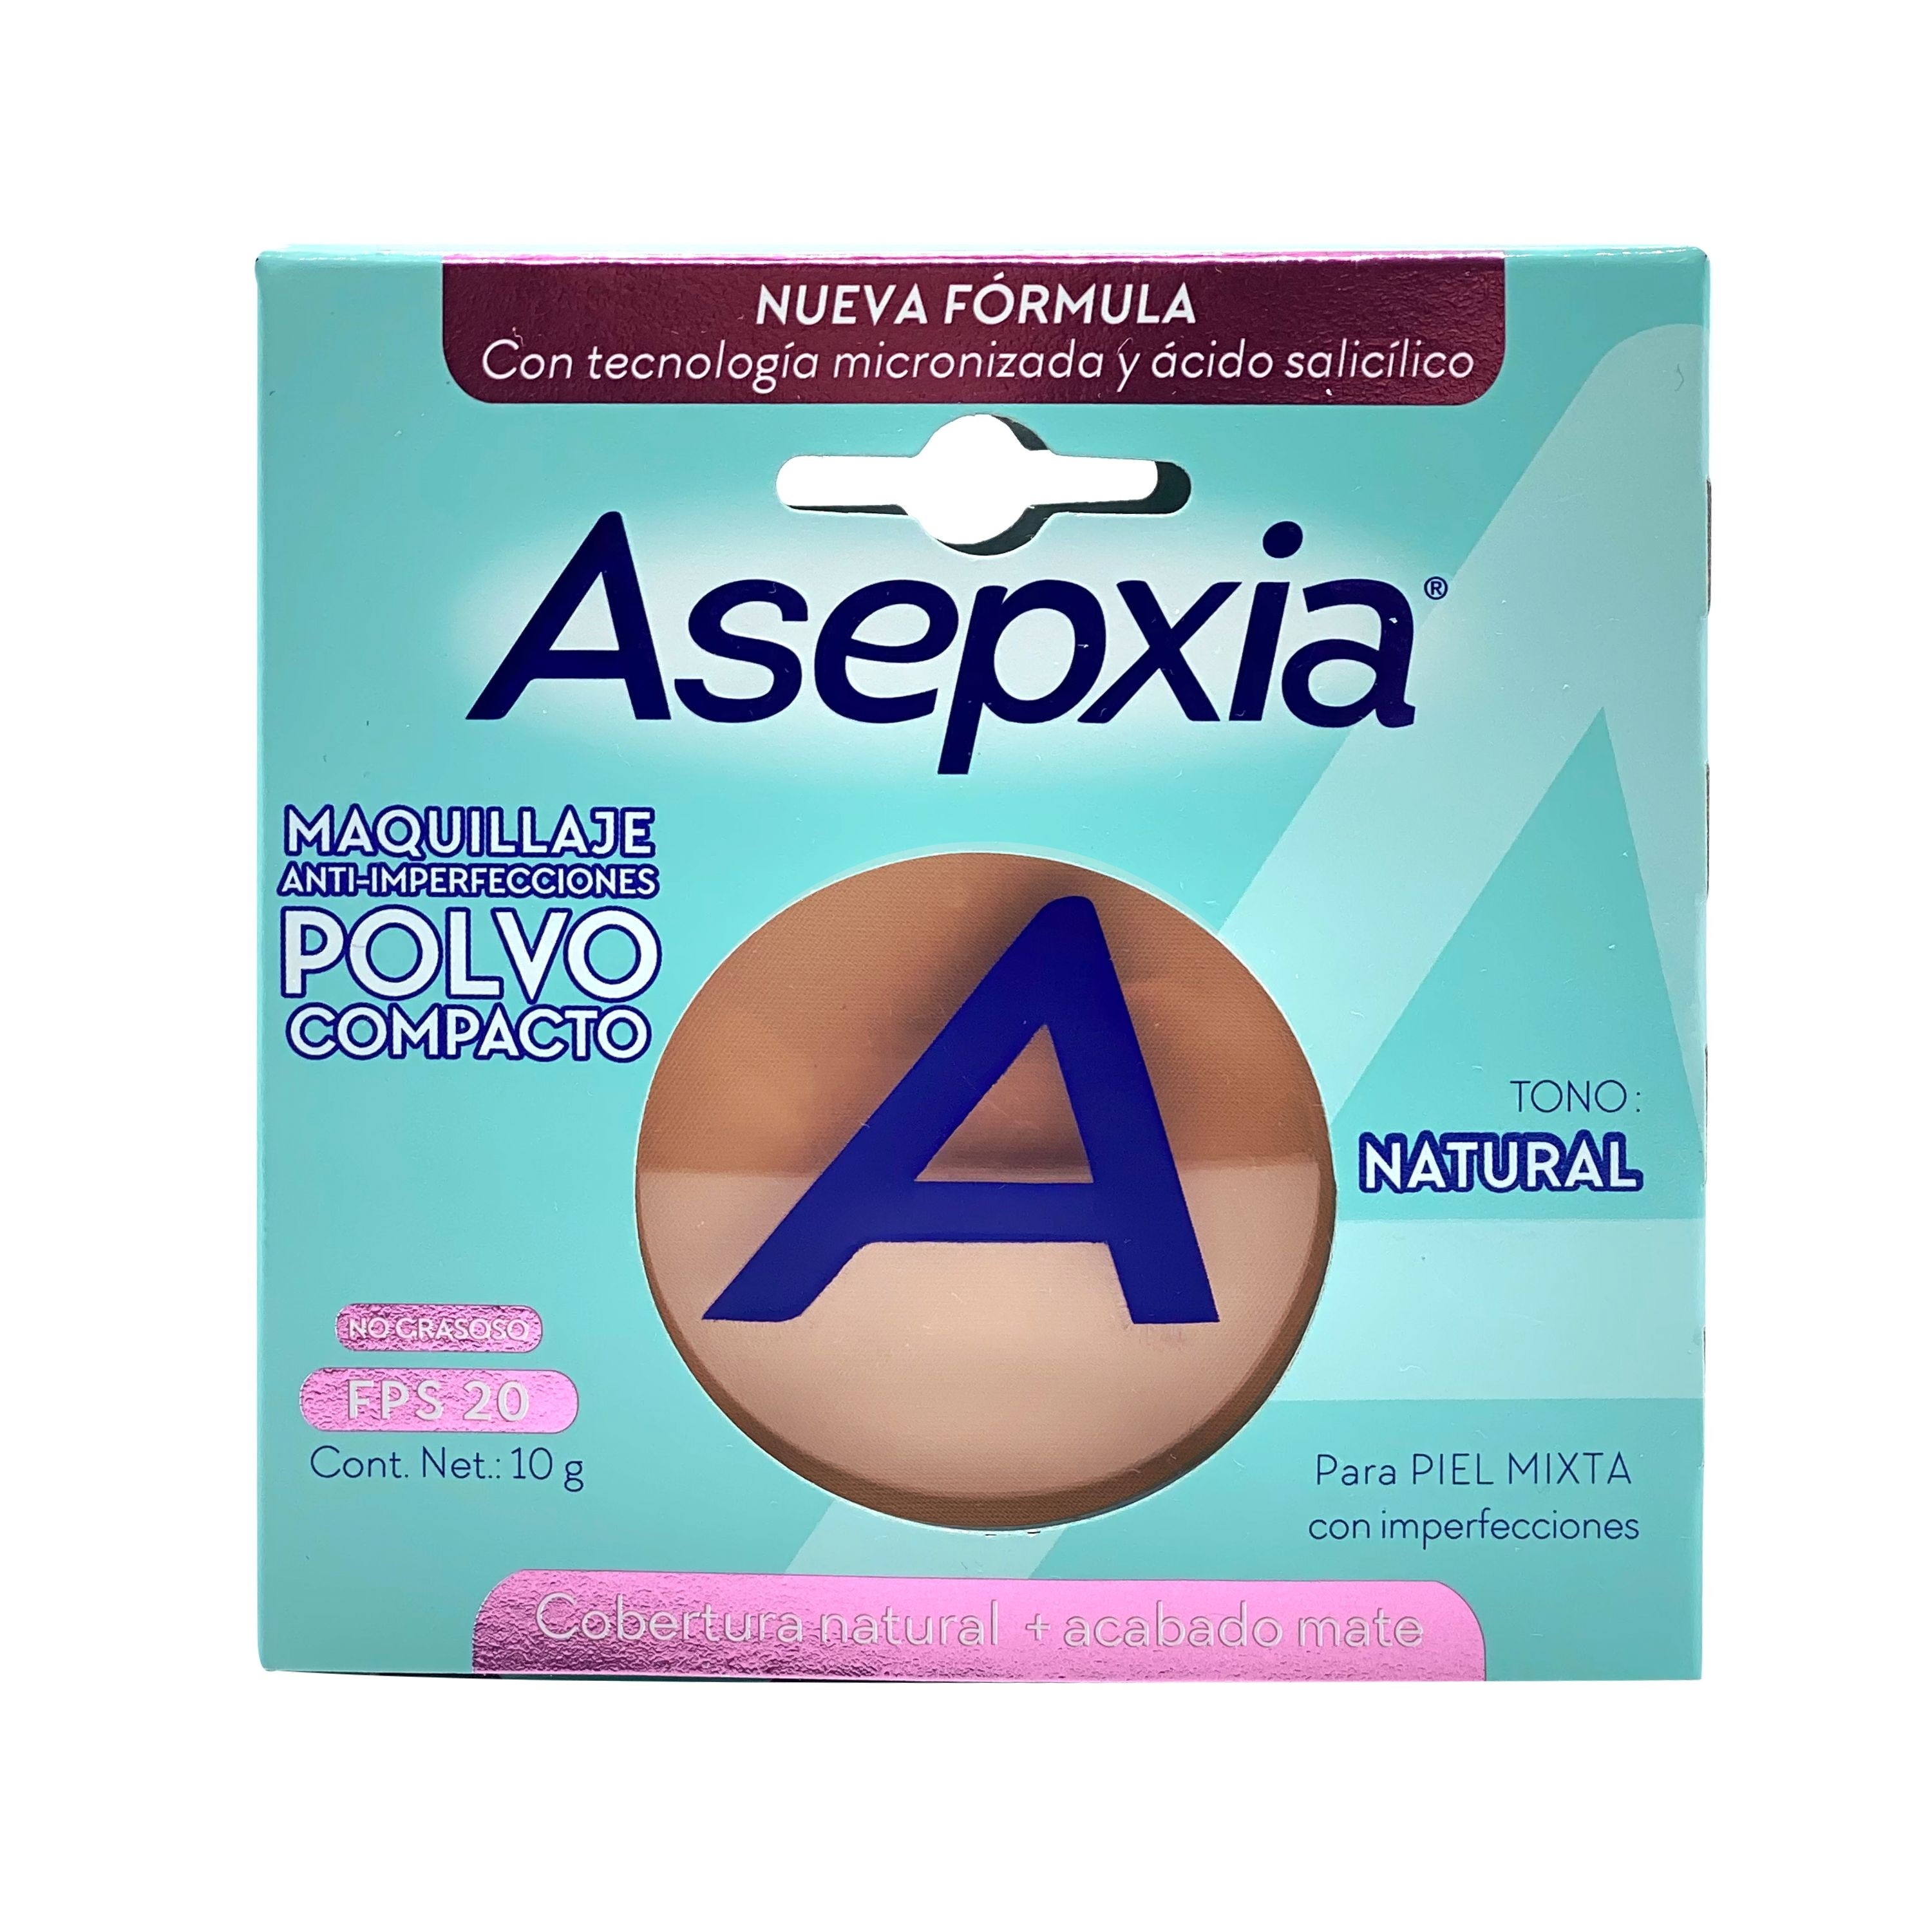 Asepxia BB Maquillaje Polvo Natural Mate 10 g